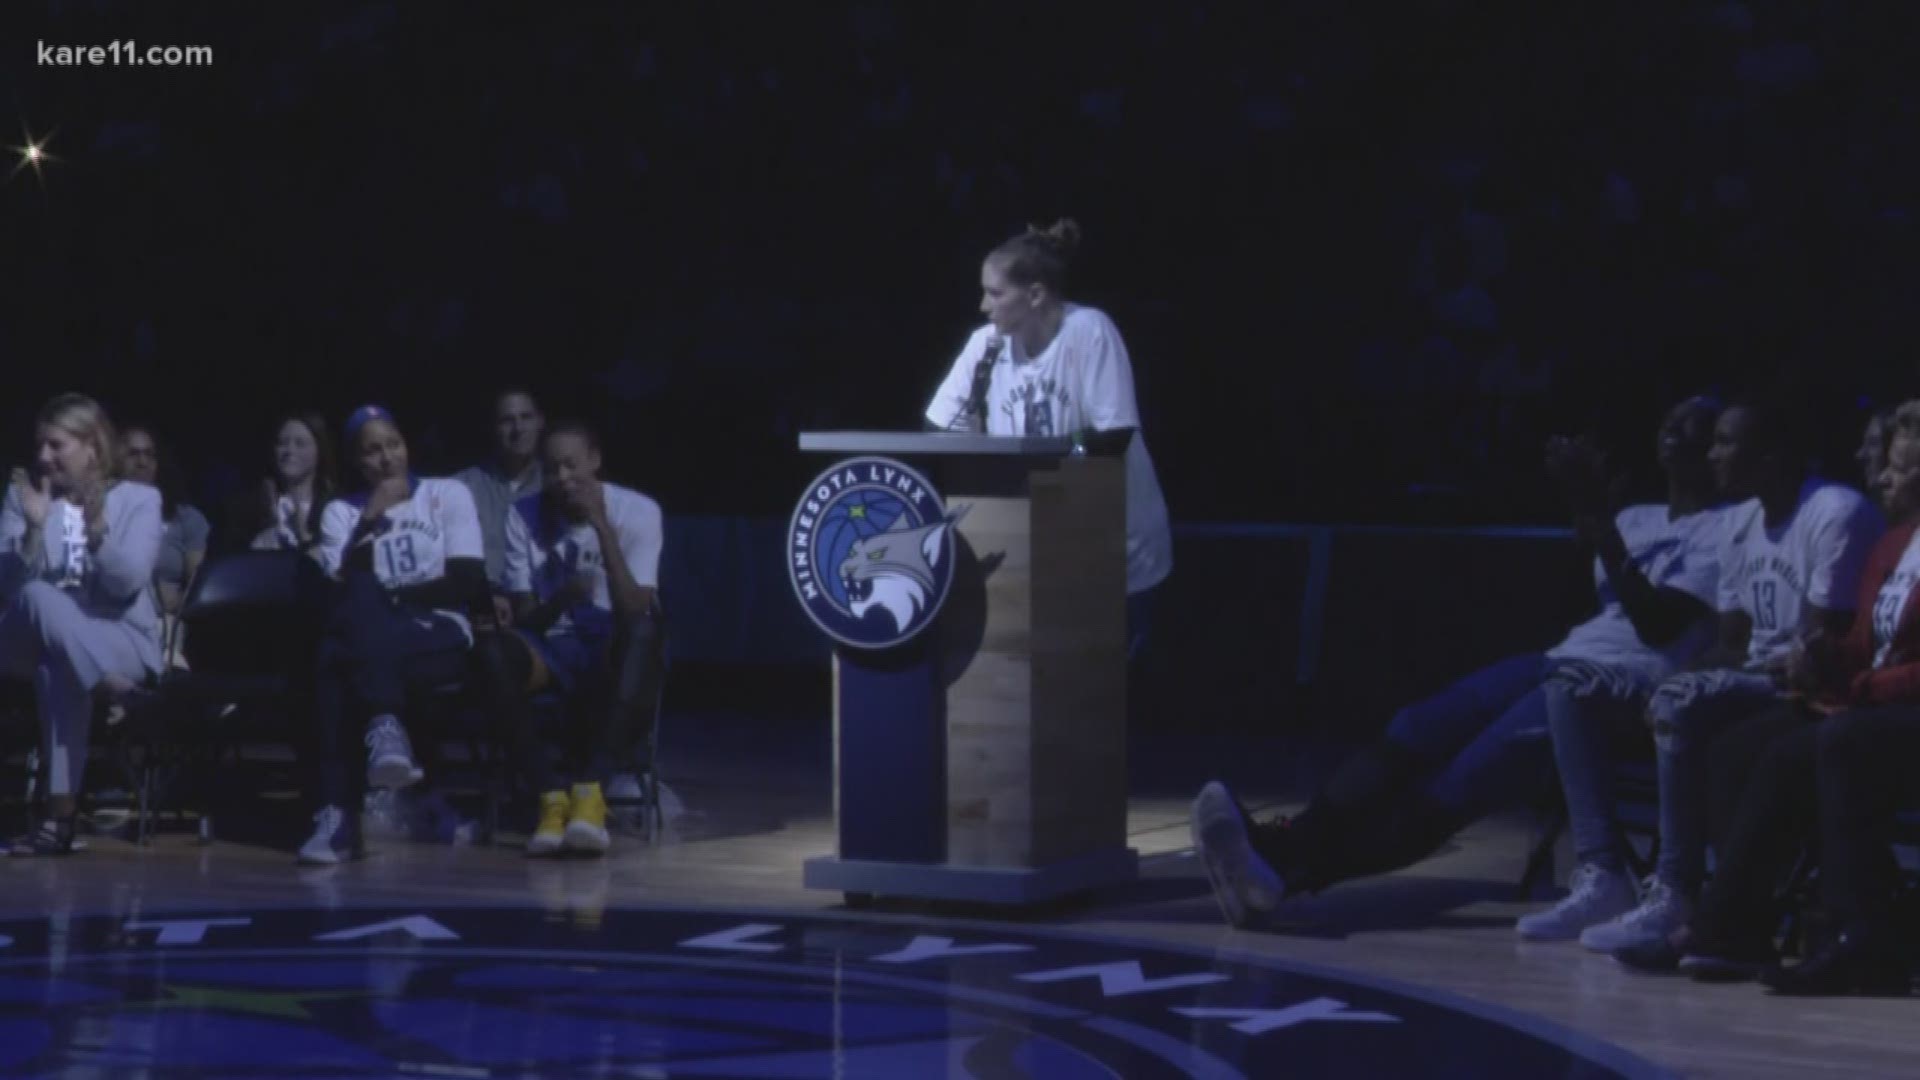 Thousands of fans came to Target Center to hear Lindsay Whalen's name announced in the starting lineup one last time, at least for the regular season. https://kare11.tv/2wdB4er